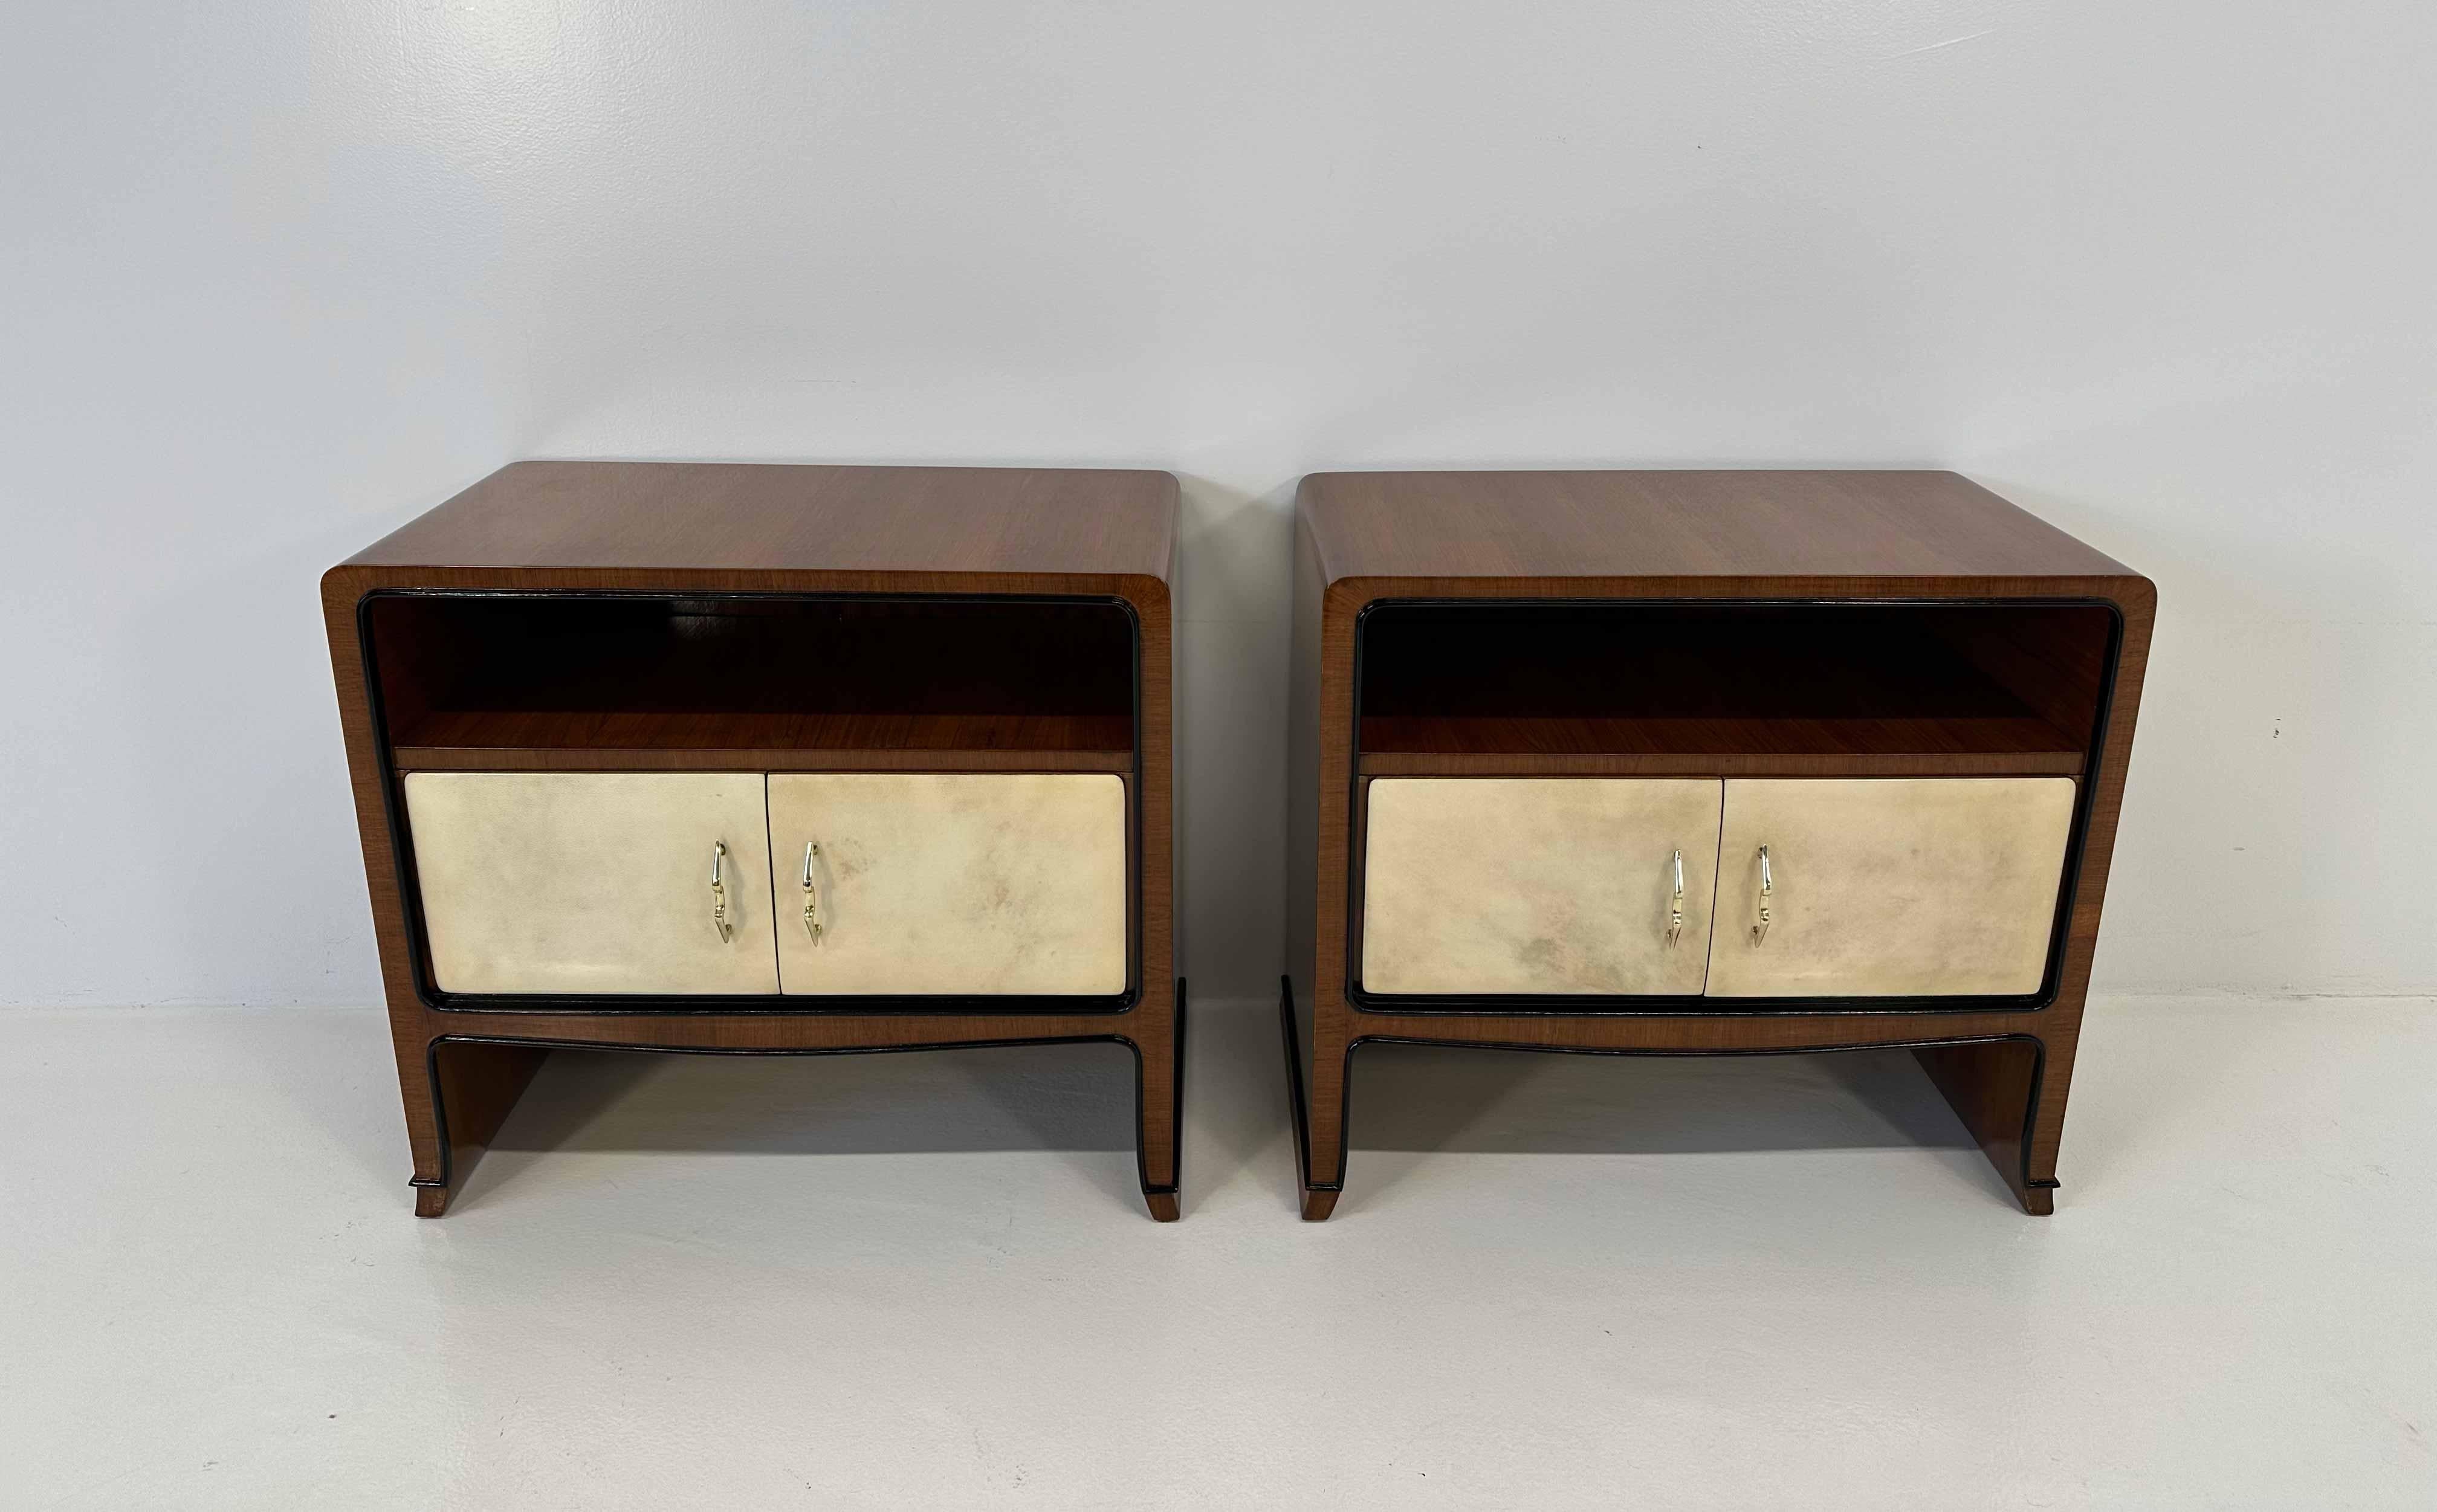 Italian Art Deco Parchment and Walnut Paolo Buffa Nightstands, 1940s In Good Condition For Sale In Meda, MB